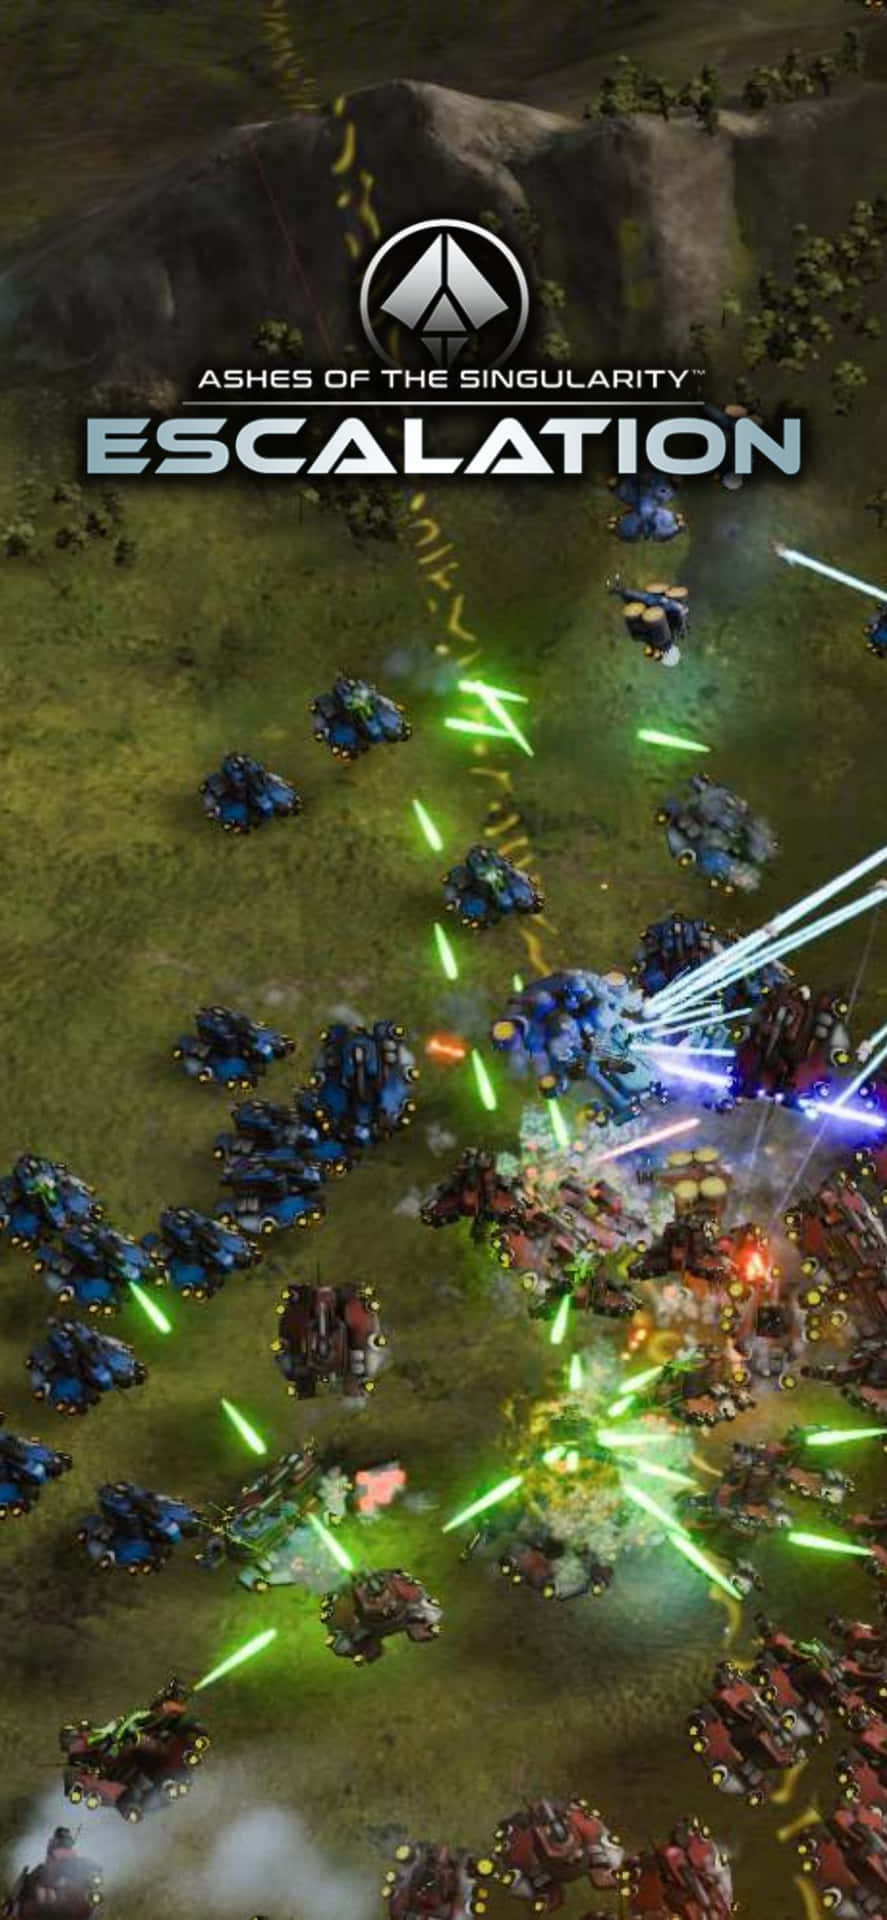 Stunning visuals from the award winning strategy game, Ashes Of The Singularity Escalation.